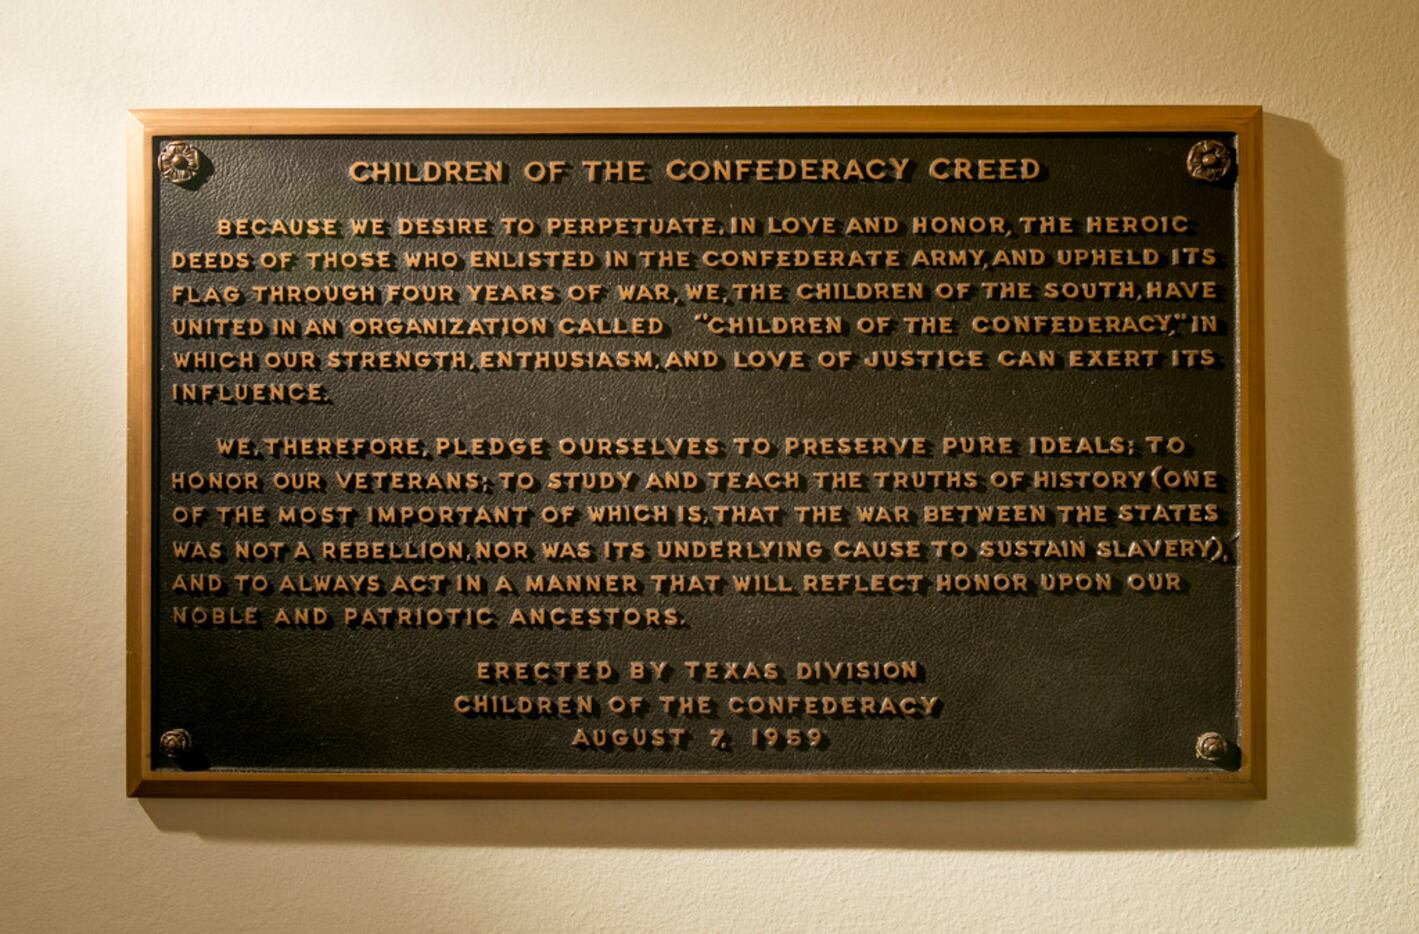 The "Children of the Confederacy Creed" plaque is on display at the Capitol in Austin.